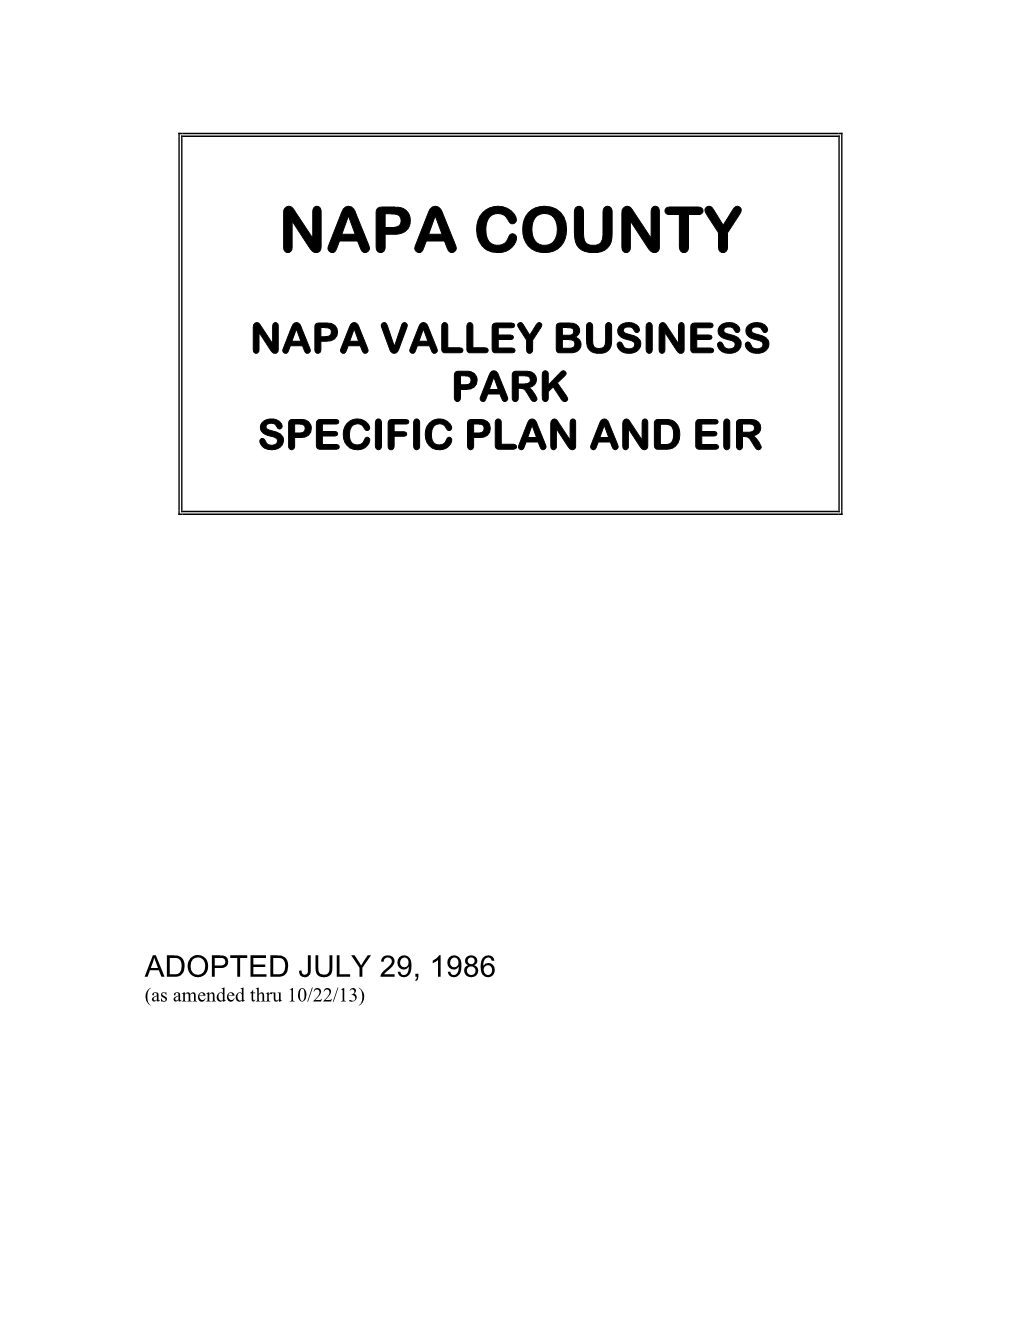 Napa Valley Business Park Specific Plan and Eir